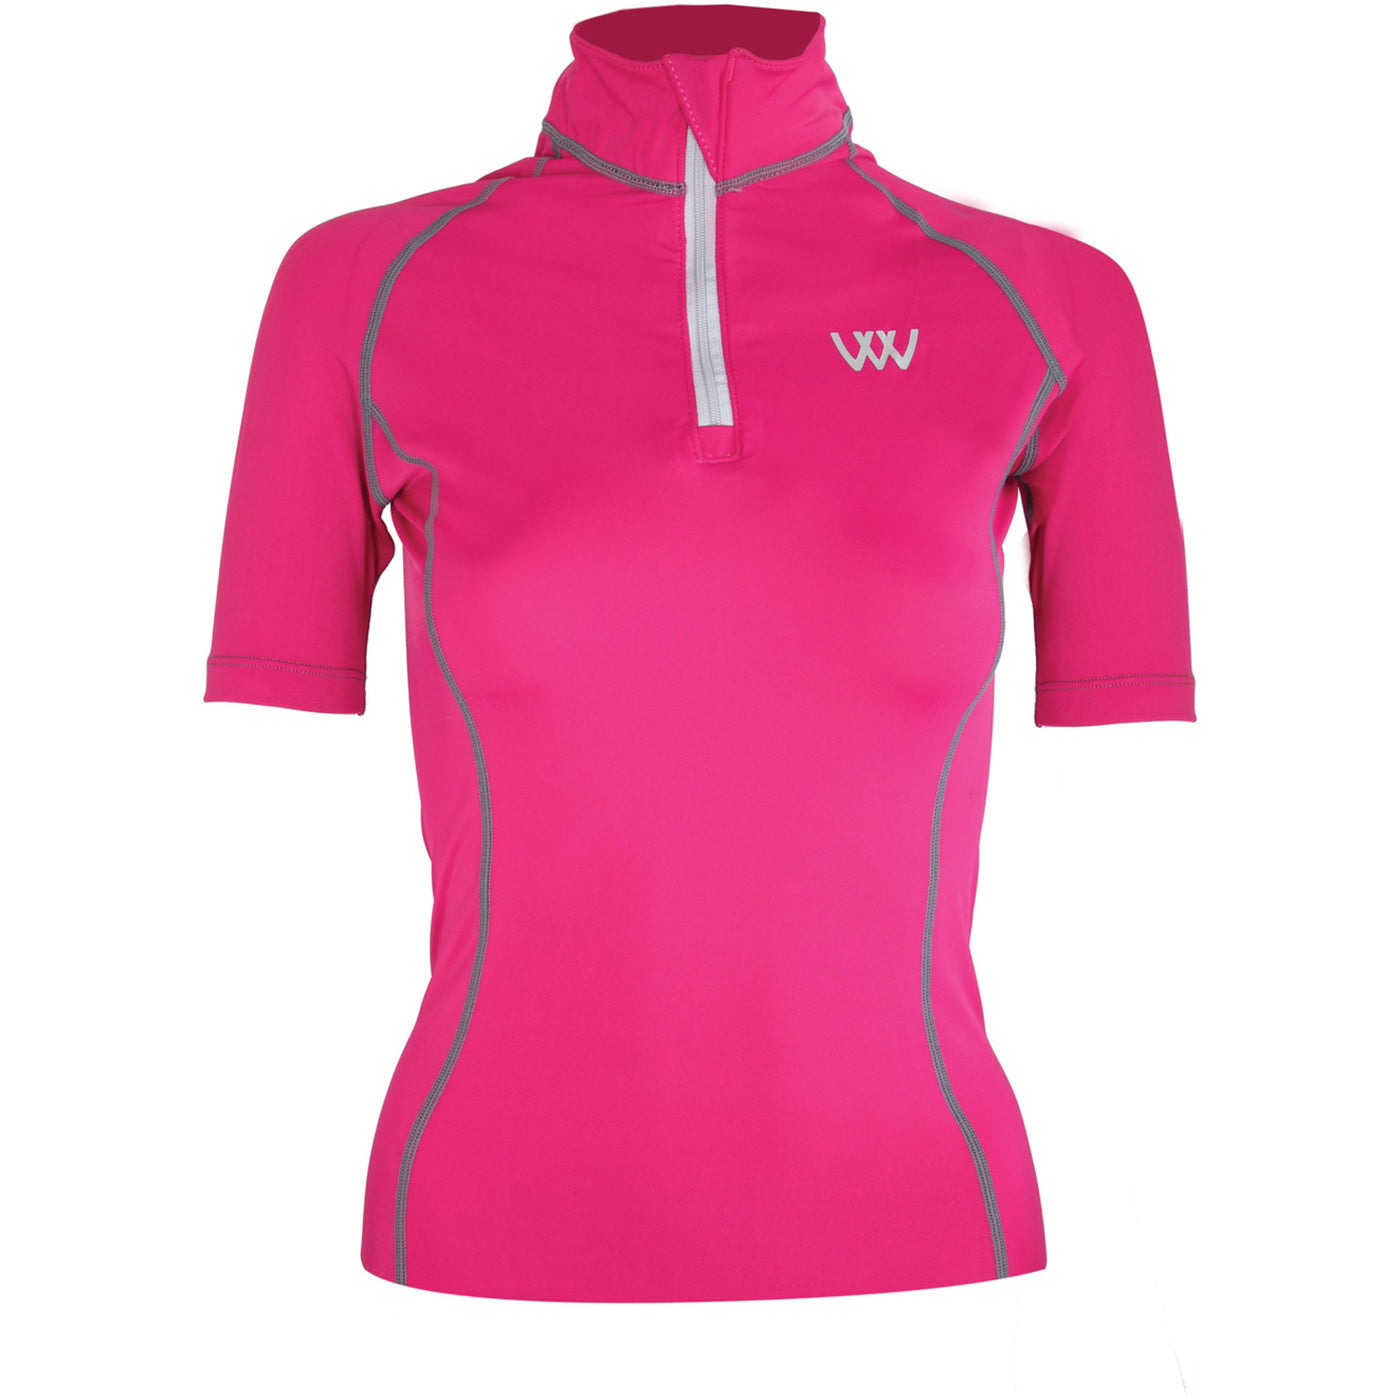 Woof Wear Young Rider Performance Riding Shirt Short Sleeve - Berry